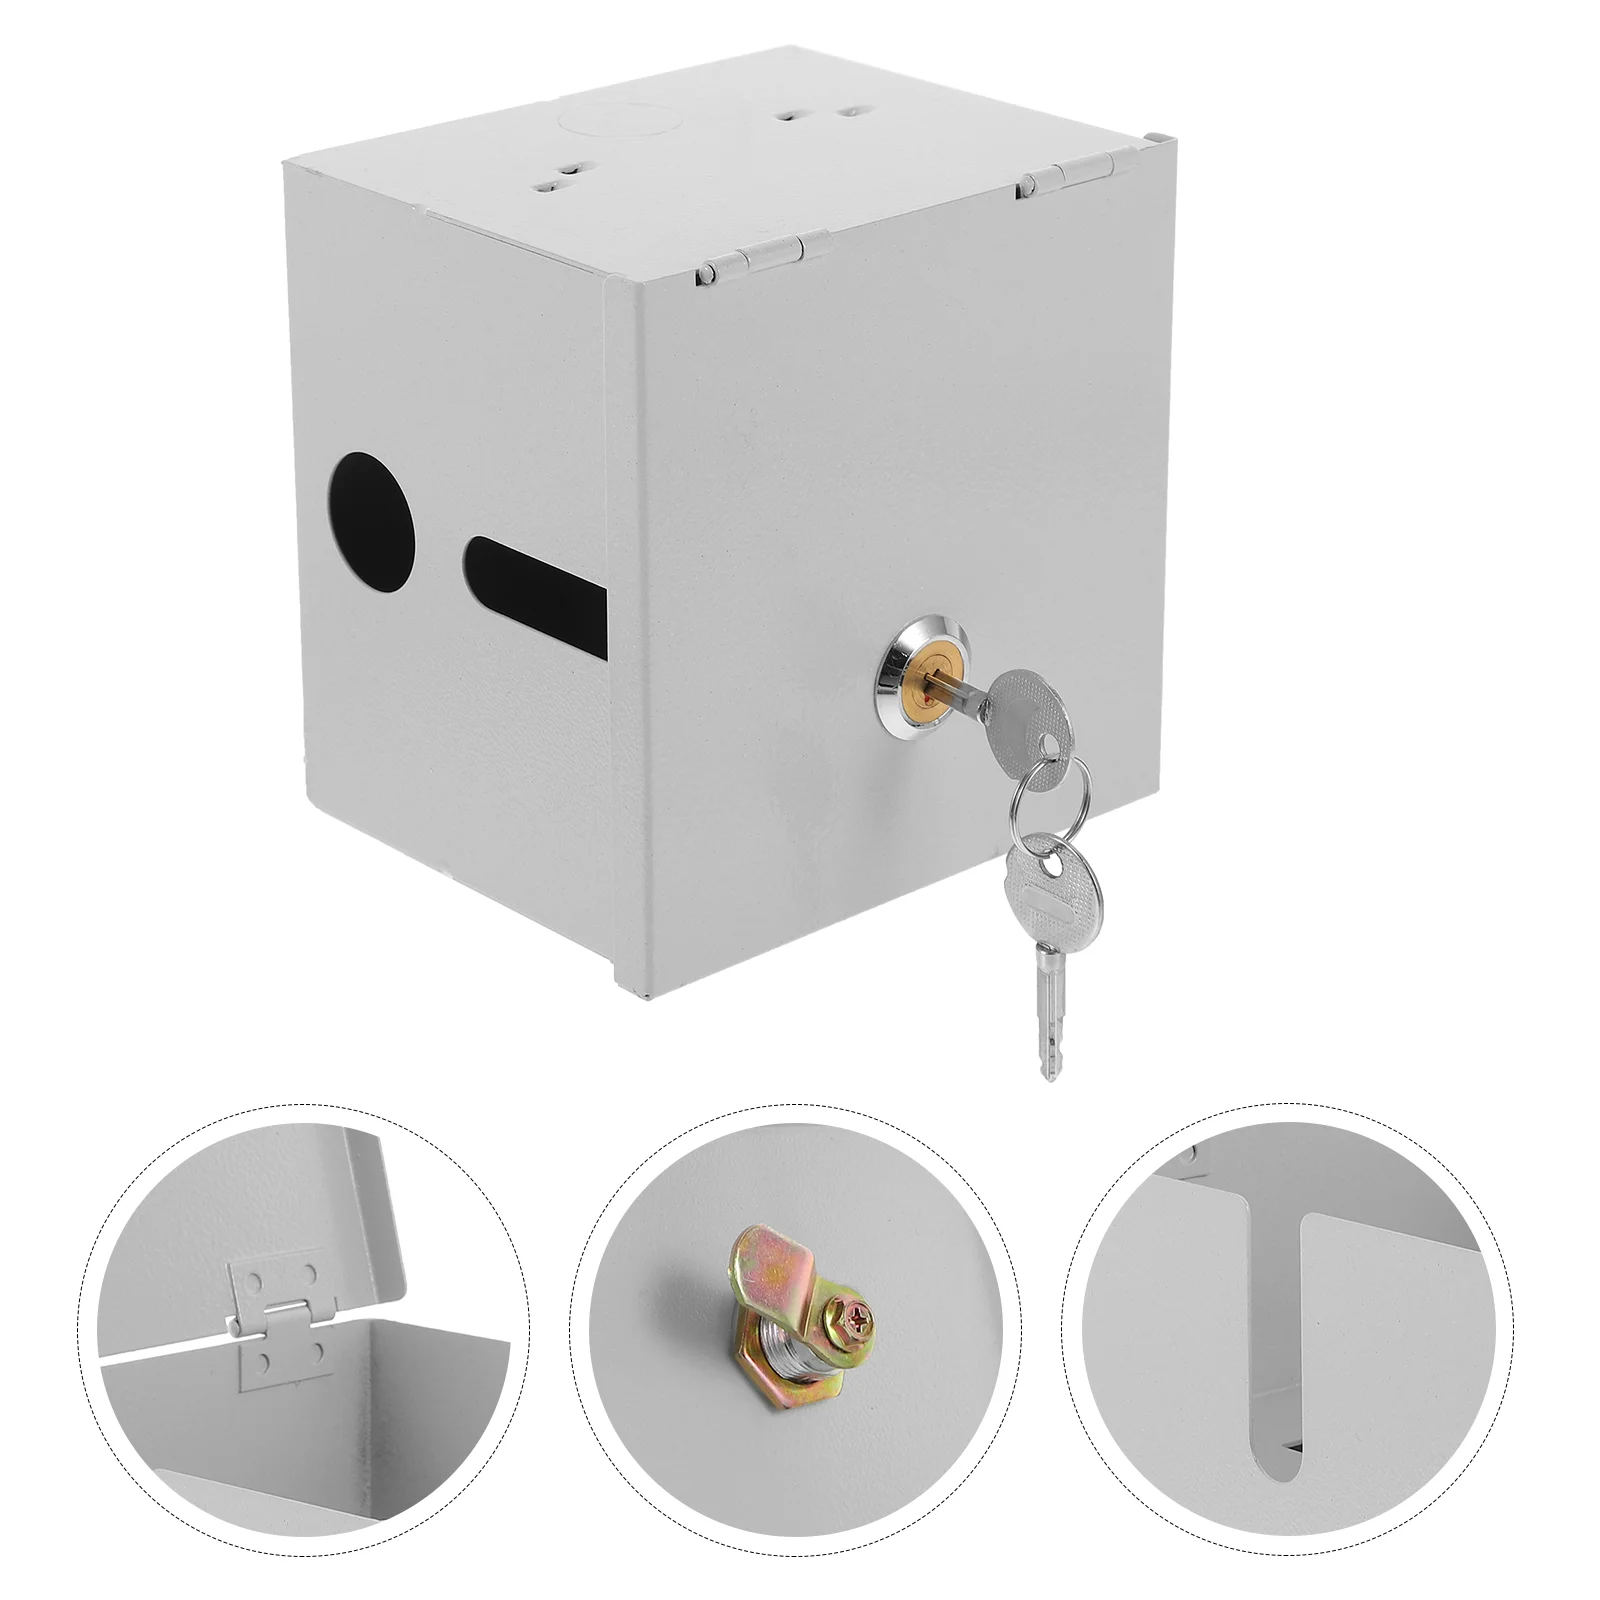 

Outdoor Extension Cord Cover Weather Proof Electrical Boxes with Lock Plug Covers for Outlets Repair Kit Wrought Iron